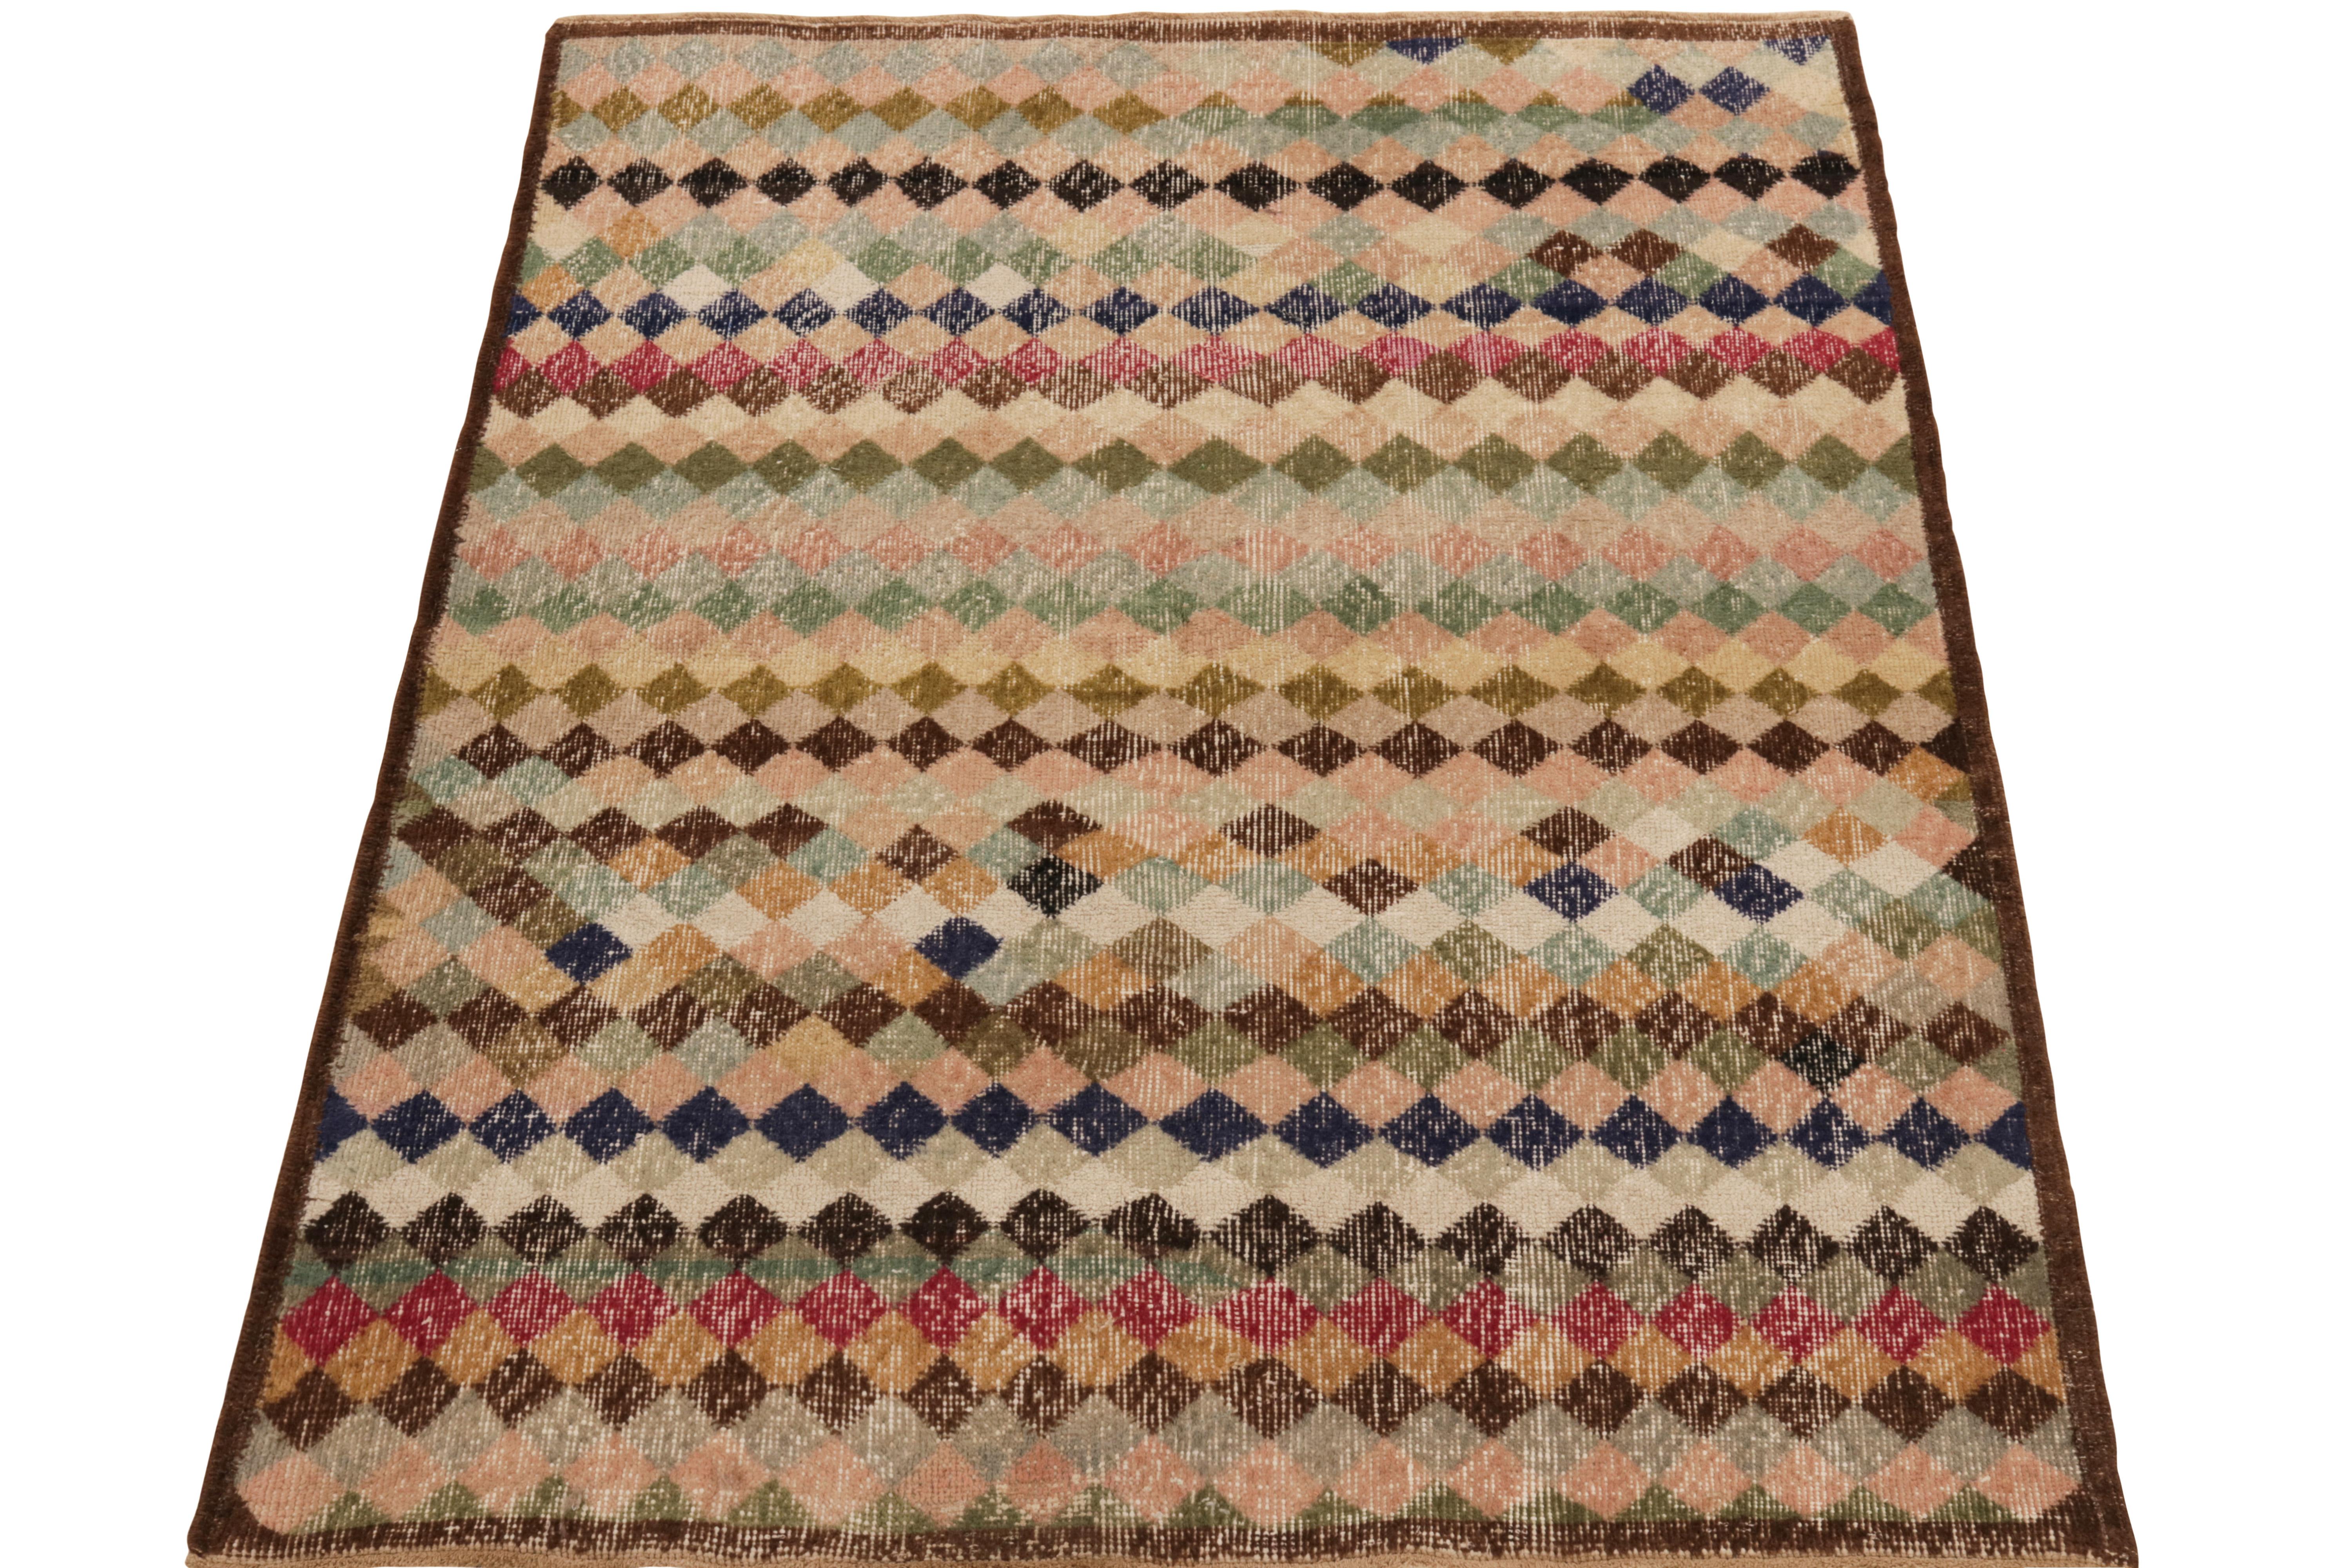 Hailing from our mid-century Pasha collection, a 1960s rug among the works of a bold designer from Turkey. 

Hand-knotted in wool, this 4x5 piece revels in a scintillating diamond pattern that lends an exceptional pagination in mid century style.